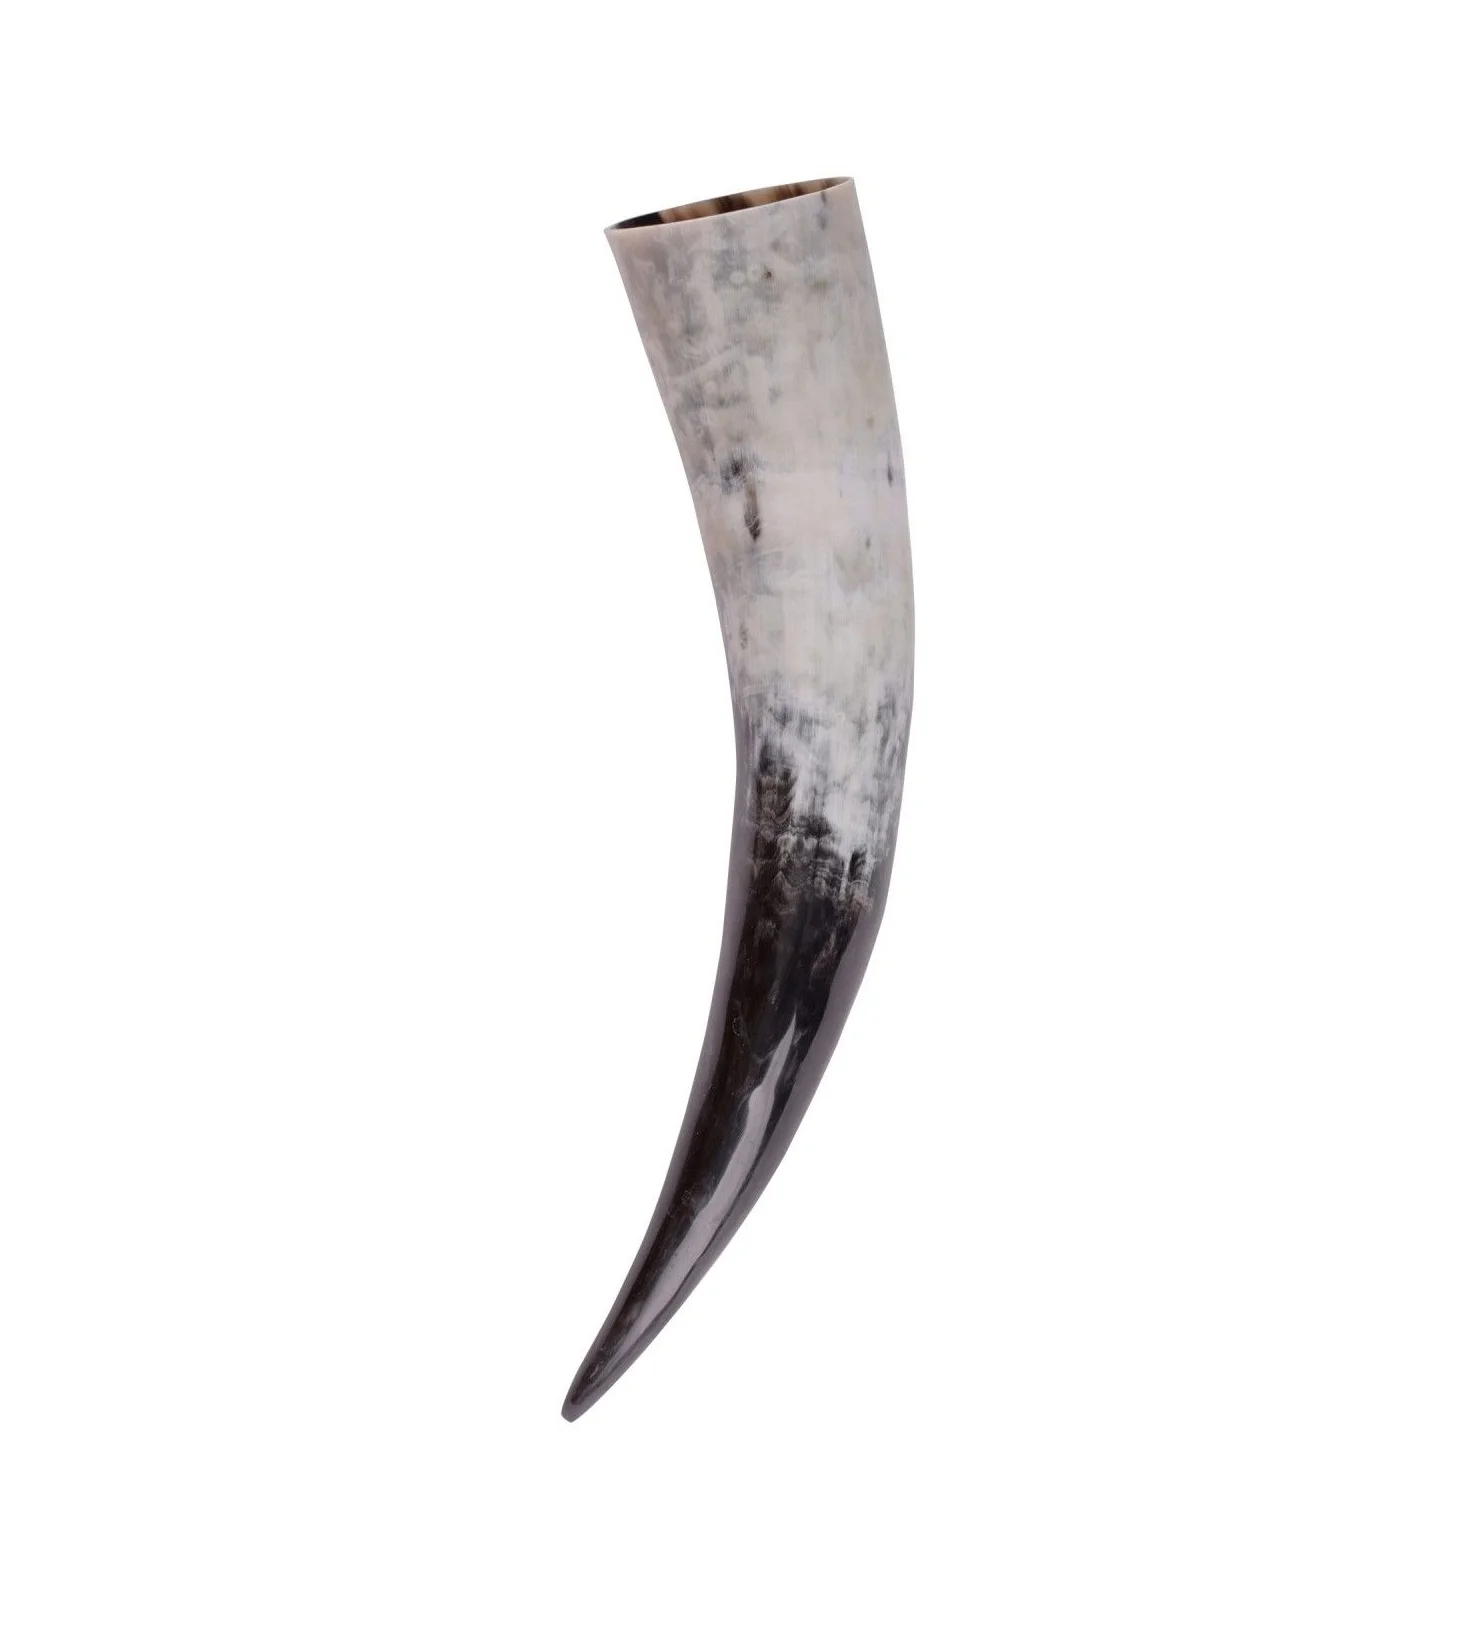 We sell product with good quality and price Custom Sized Buffalo/OX Drinking Horn